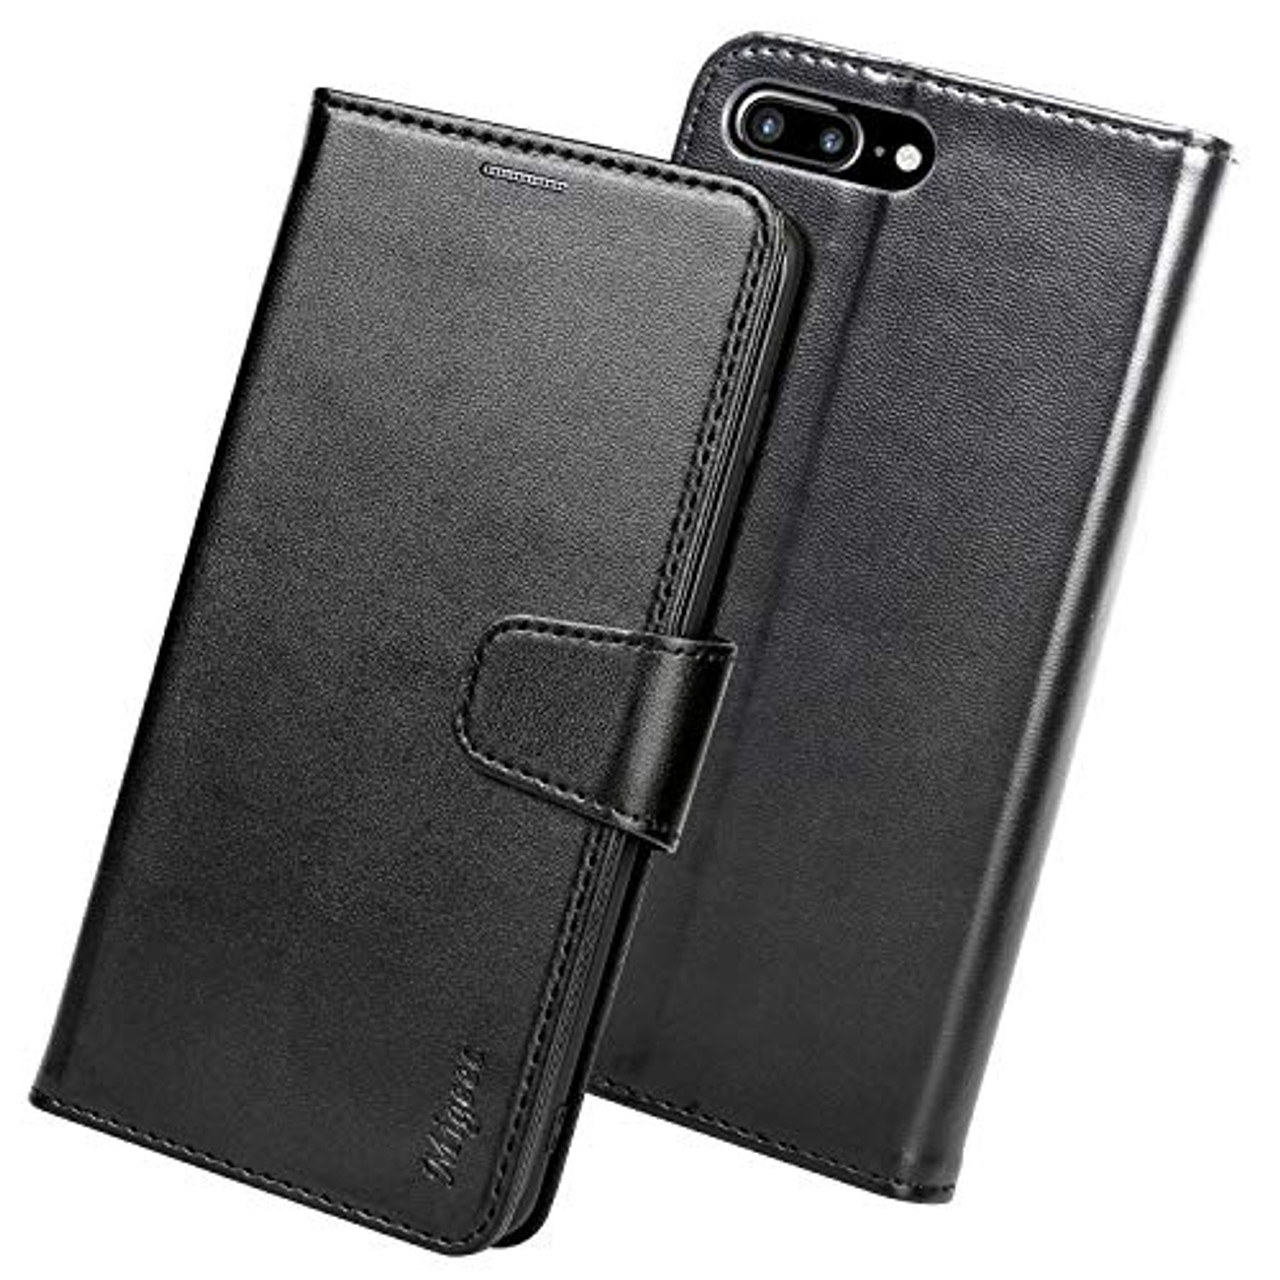 Migeec Iphone 7 Plus 8 Plus Case Pu Leather Wallet Case Rfid Blocking Flip Cover With Credit Card Holder And Pocket For Iphone 7 Plus 8 Plus Black Toyboxtech